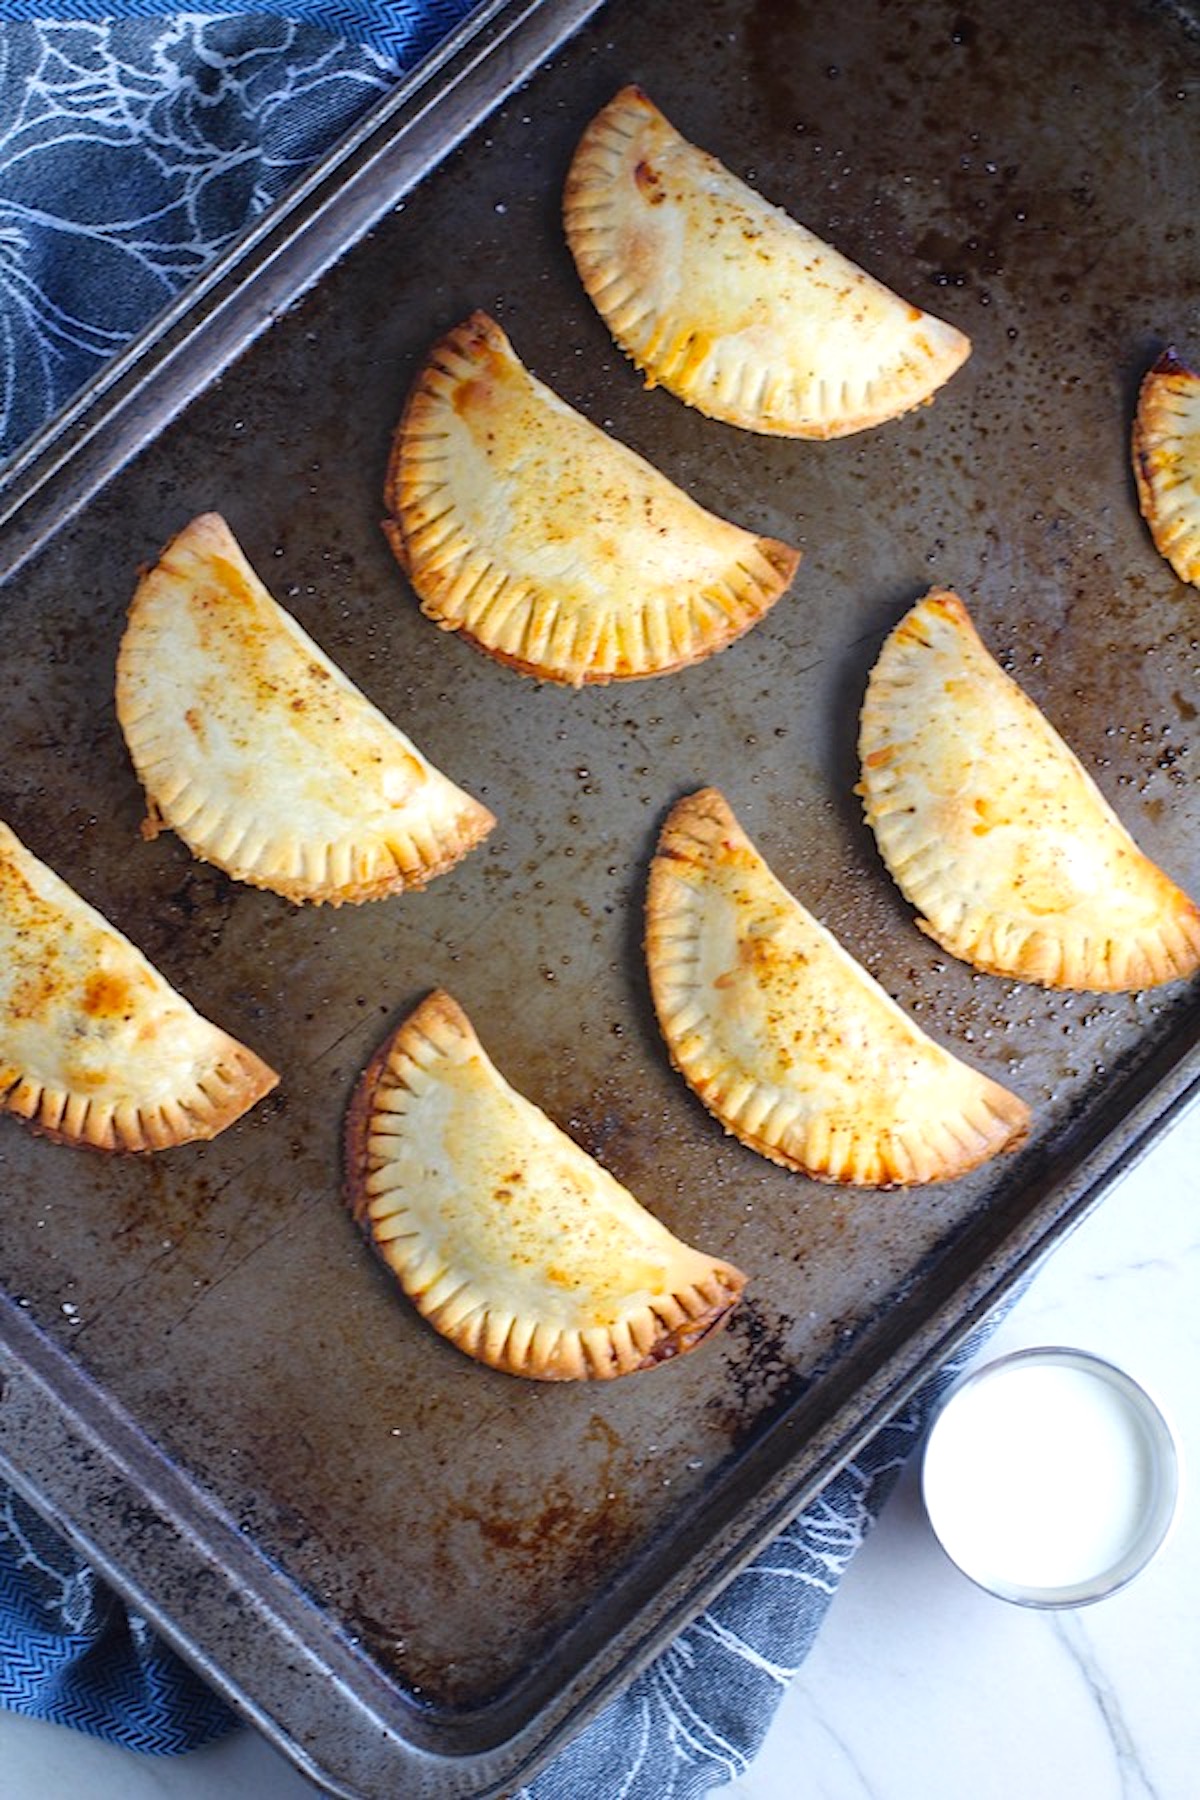 Ground Spiced Beef Empanadas cooked on a pan. Flaky, buttery pastry on the outside with a savory, smokey, salty ground beef filling.